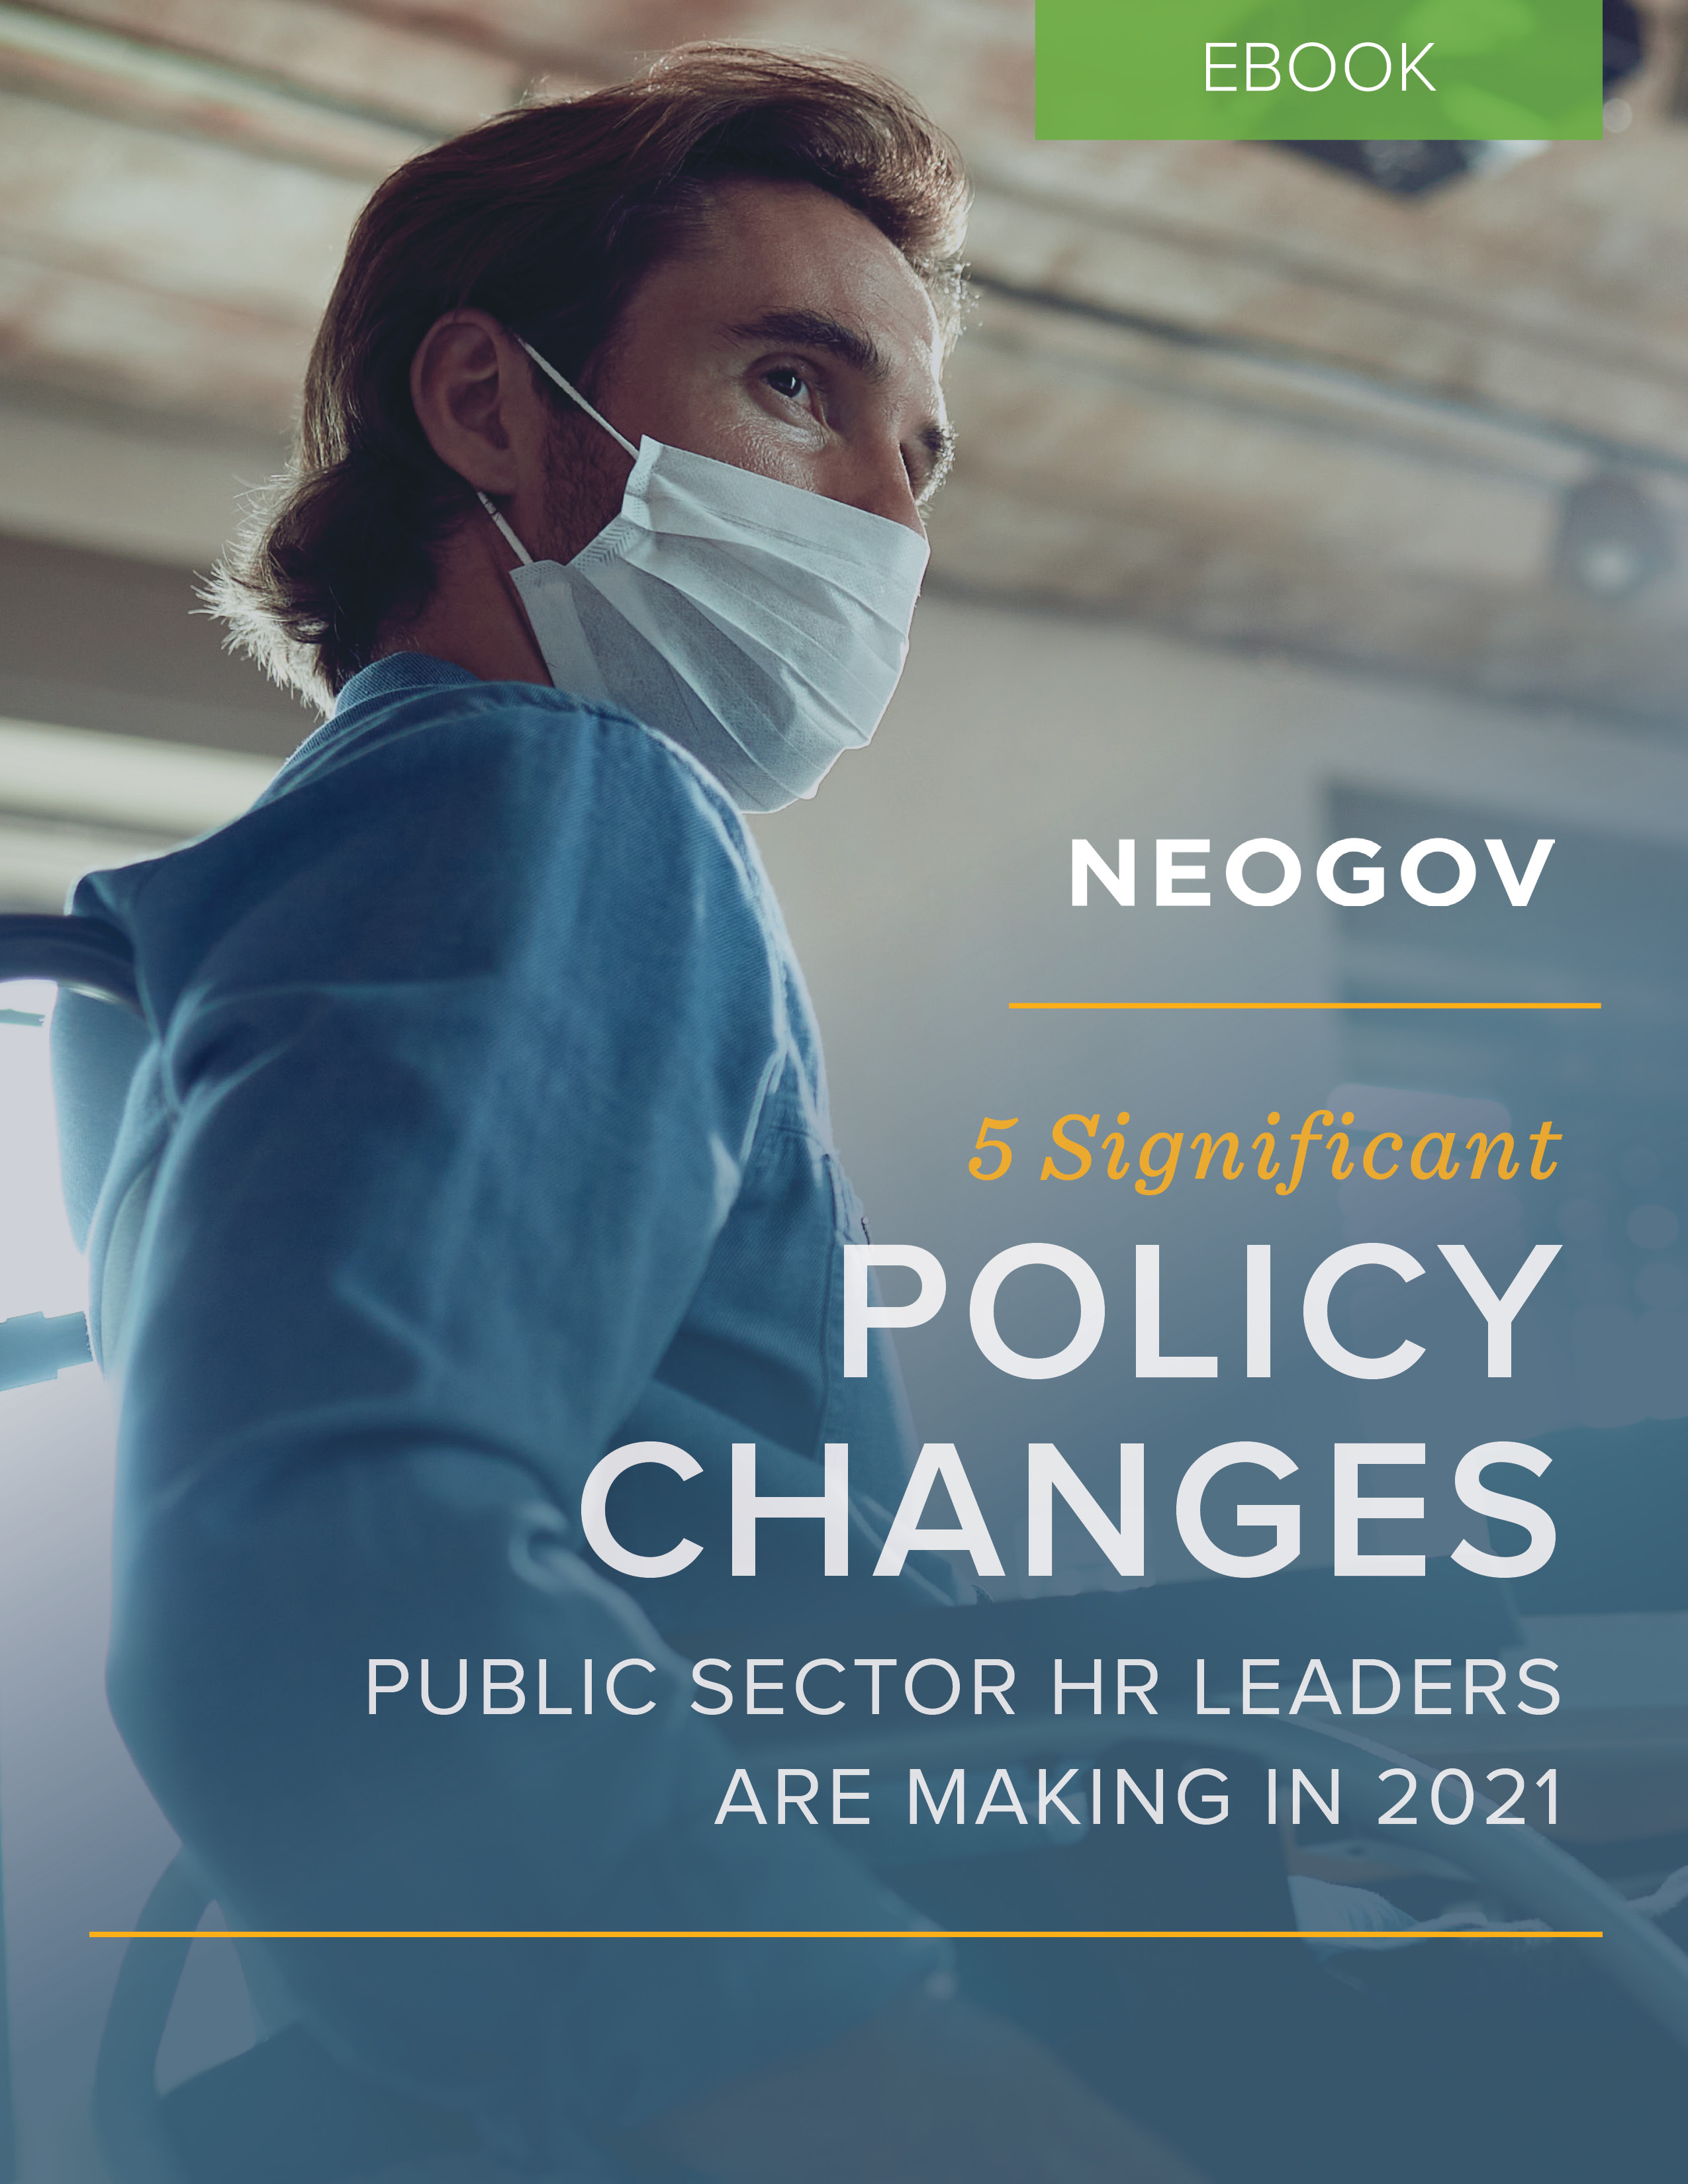 5 Significant Policy Changes Public Sector HR Leaders are Making in 2021